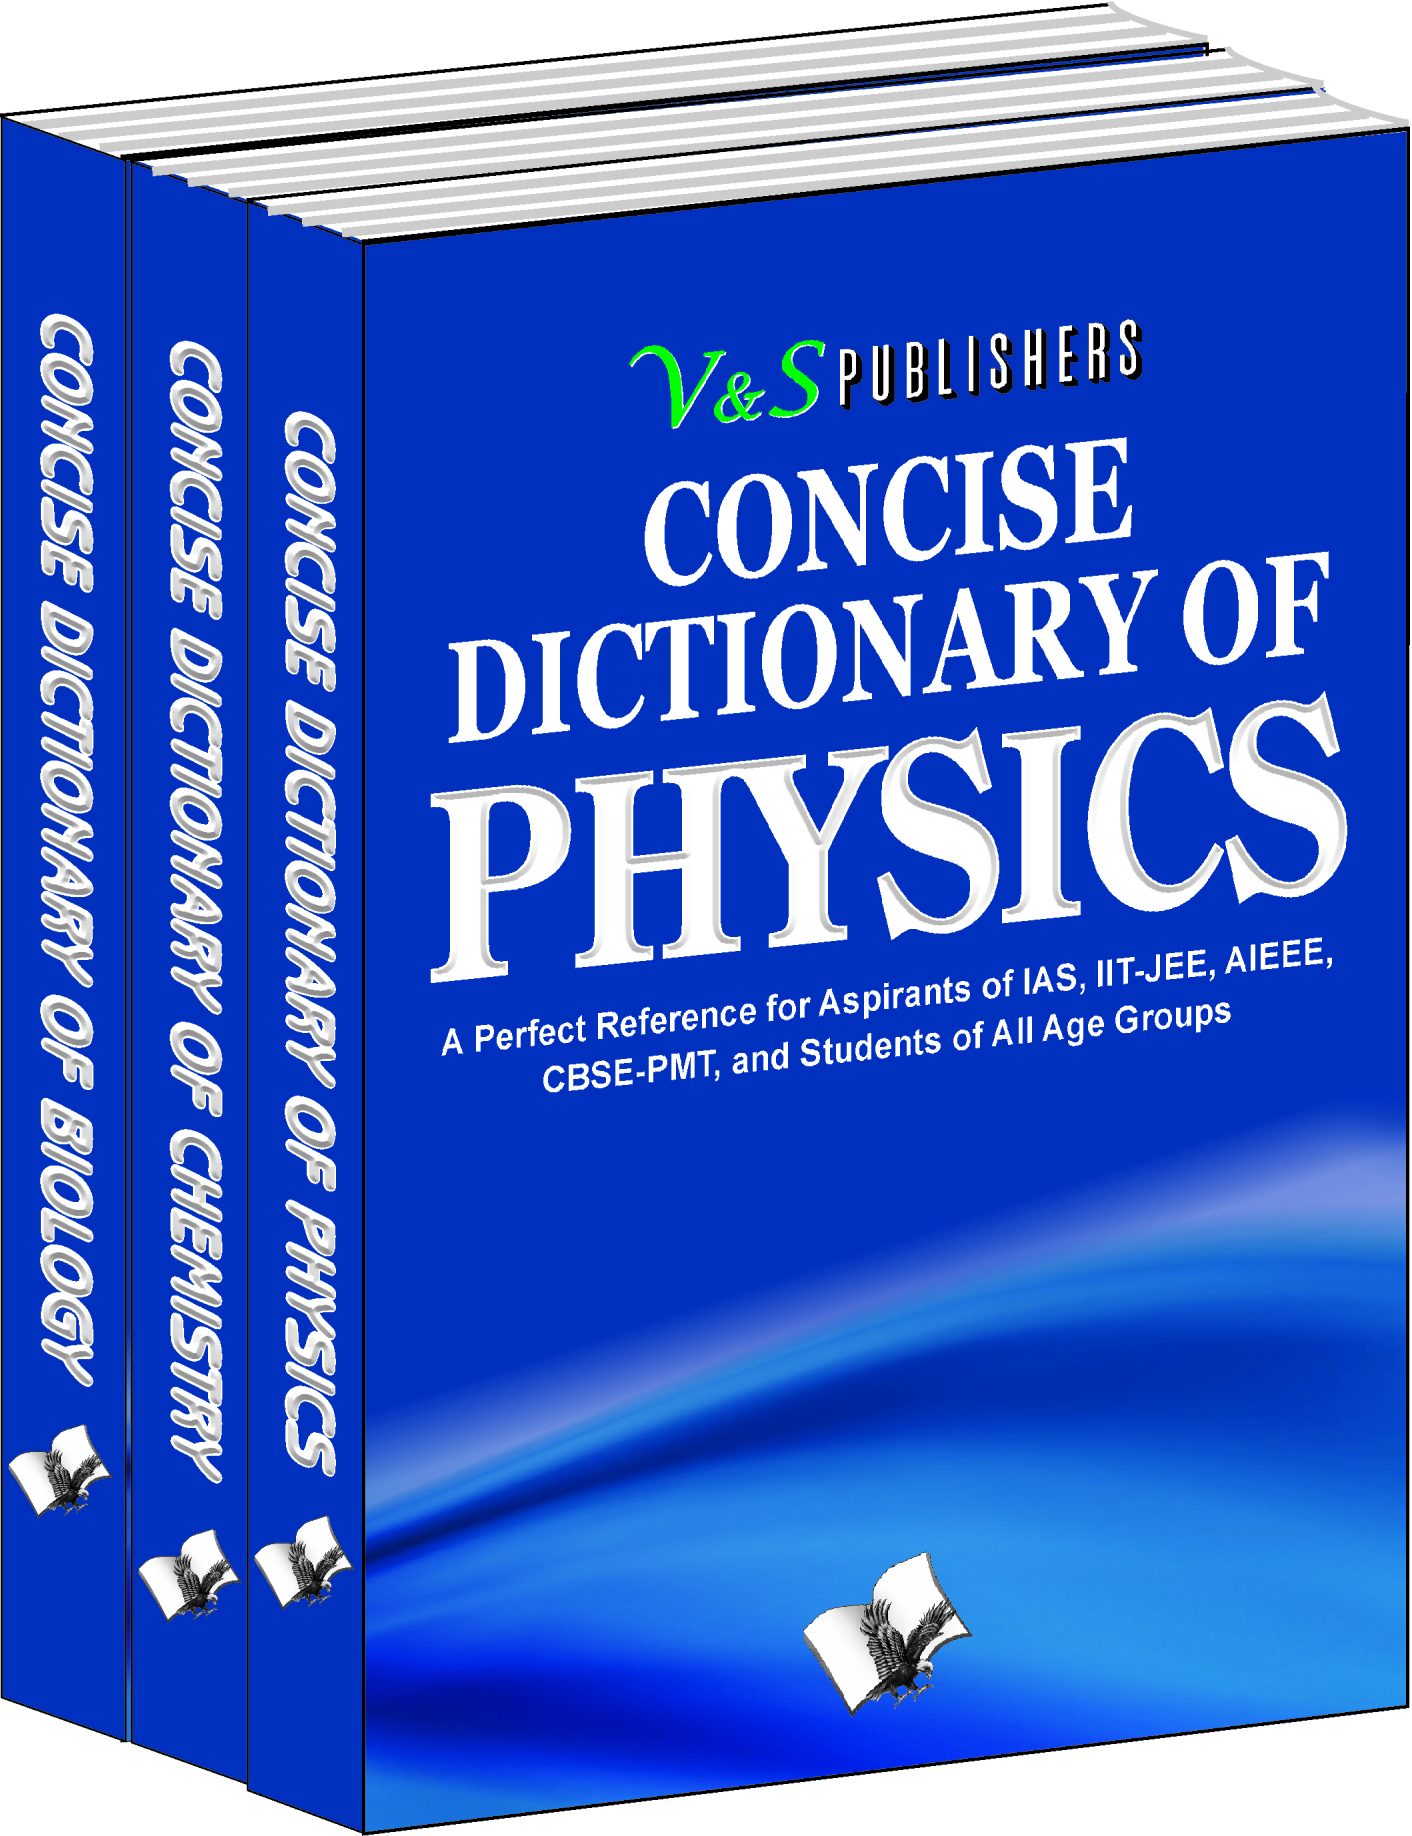 Concise PCB Dictionary Value Pack -Terms used in Physics, Chemistry & Biology with simplified meaning for students, job exams & common readers